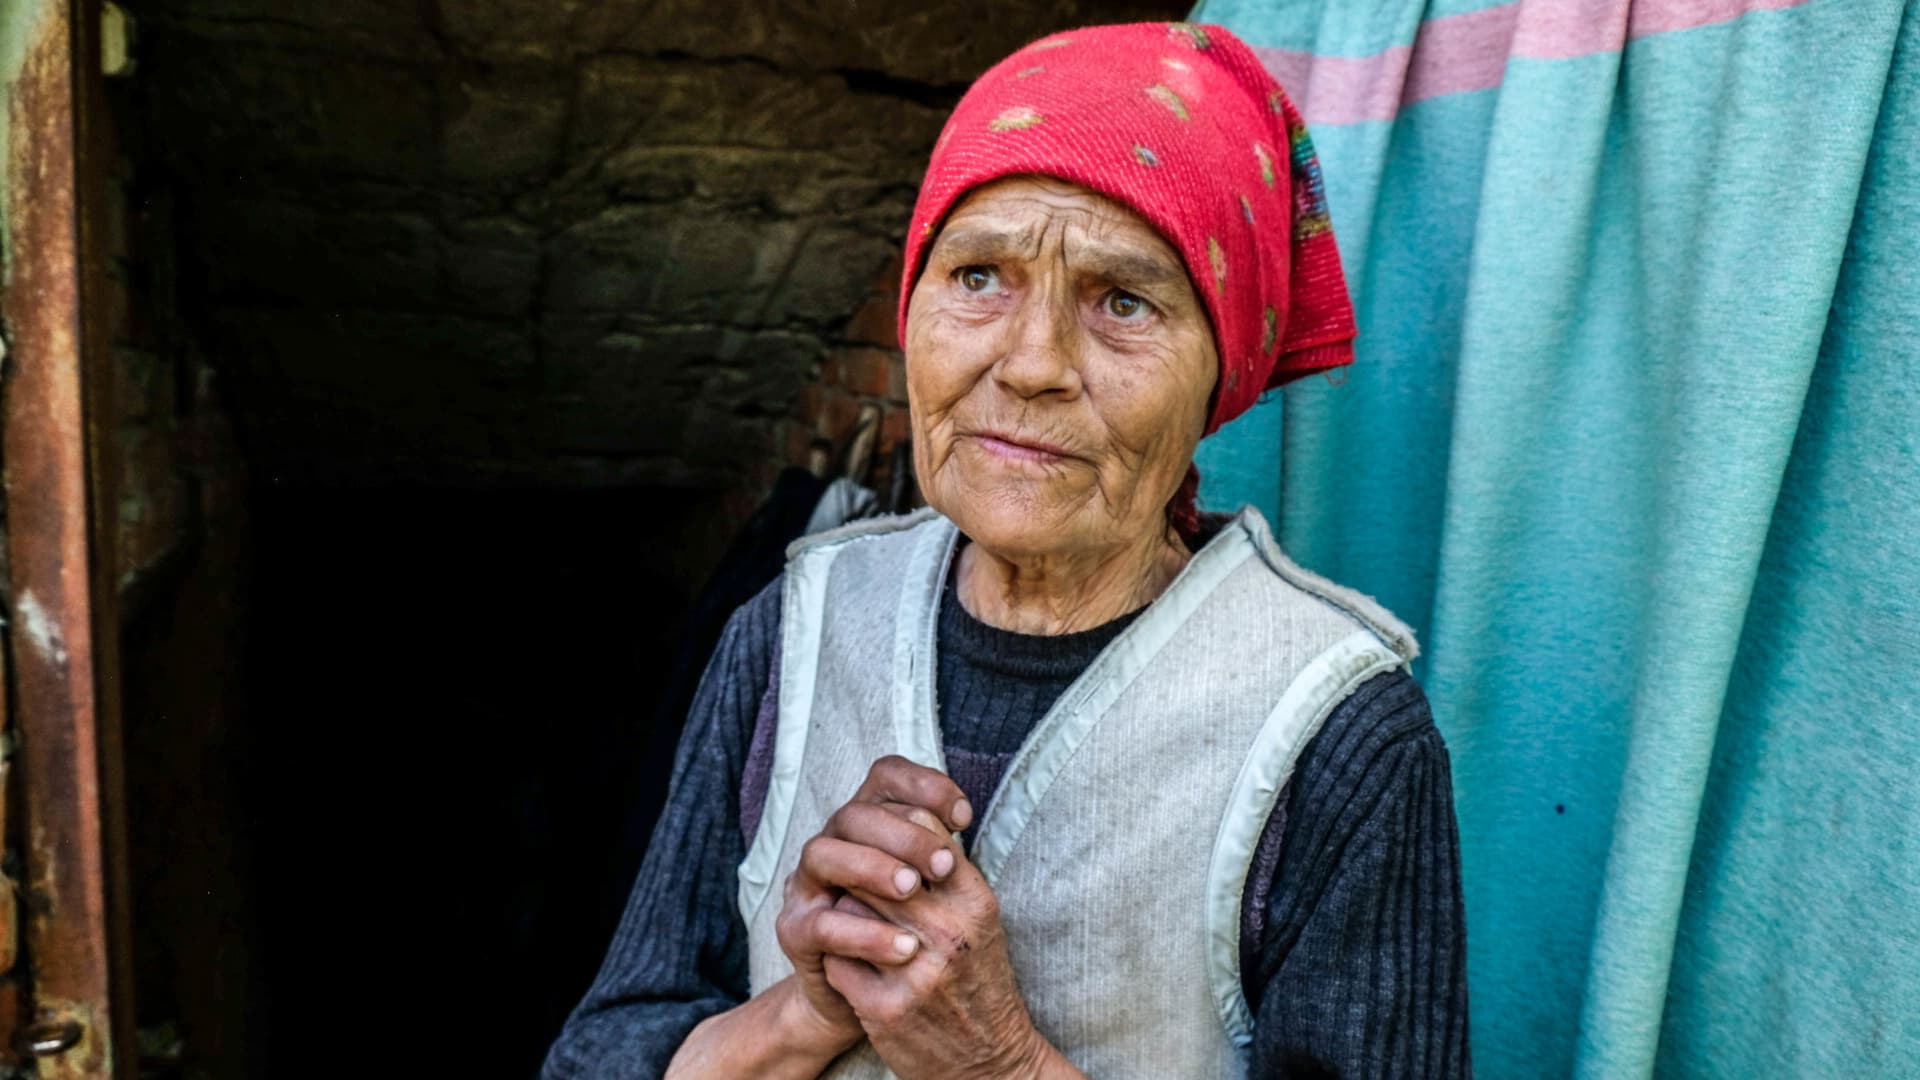 An elderly woman, Alina, 76 years old, in front of the shelter where she sleeps. Siversk is a town of 11,000 inhabitants known for its brick factory. the town is located in the Donetsk region.